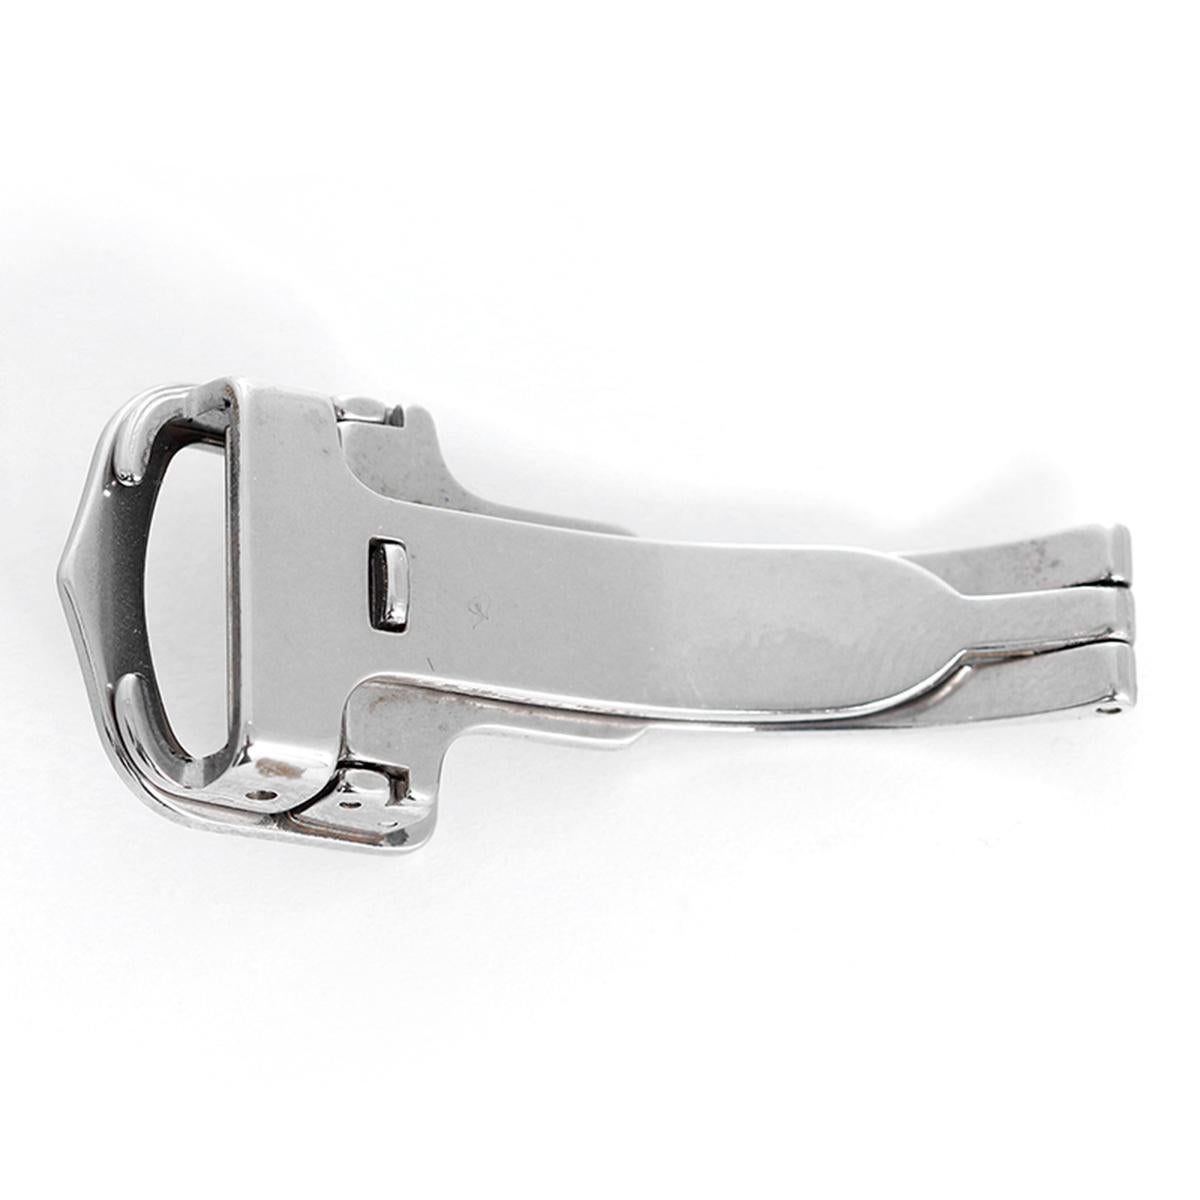 Cartier Stainless Steel Deployant Clasp/Buckle 14mm - Stainless steel genuine Cartier 14mm deployant clasp/buckle.